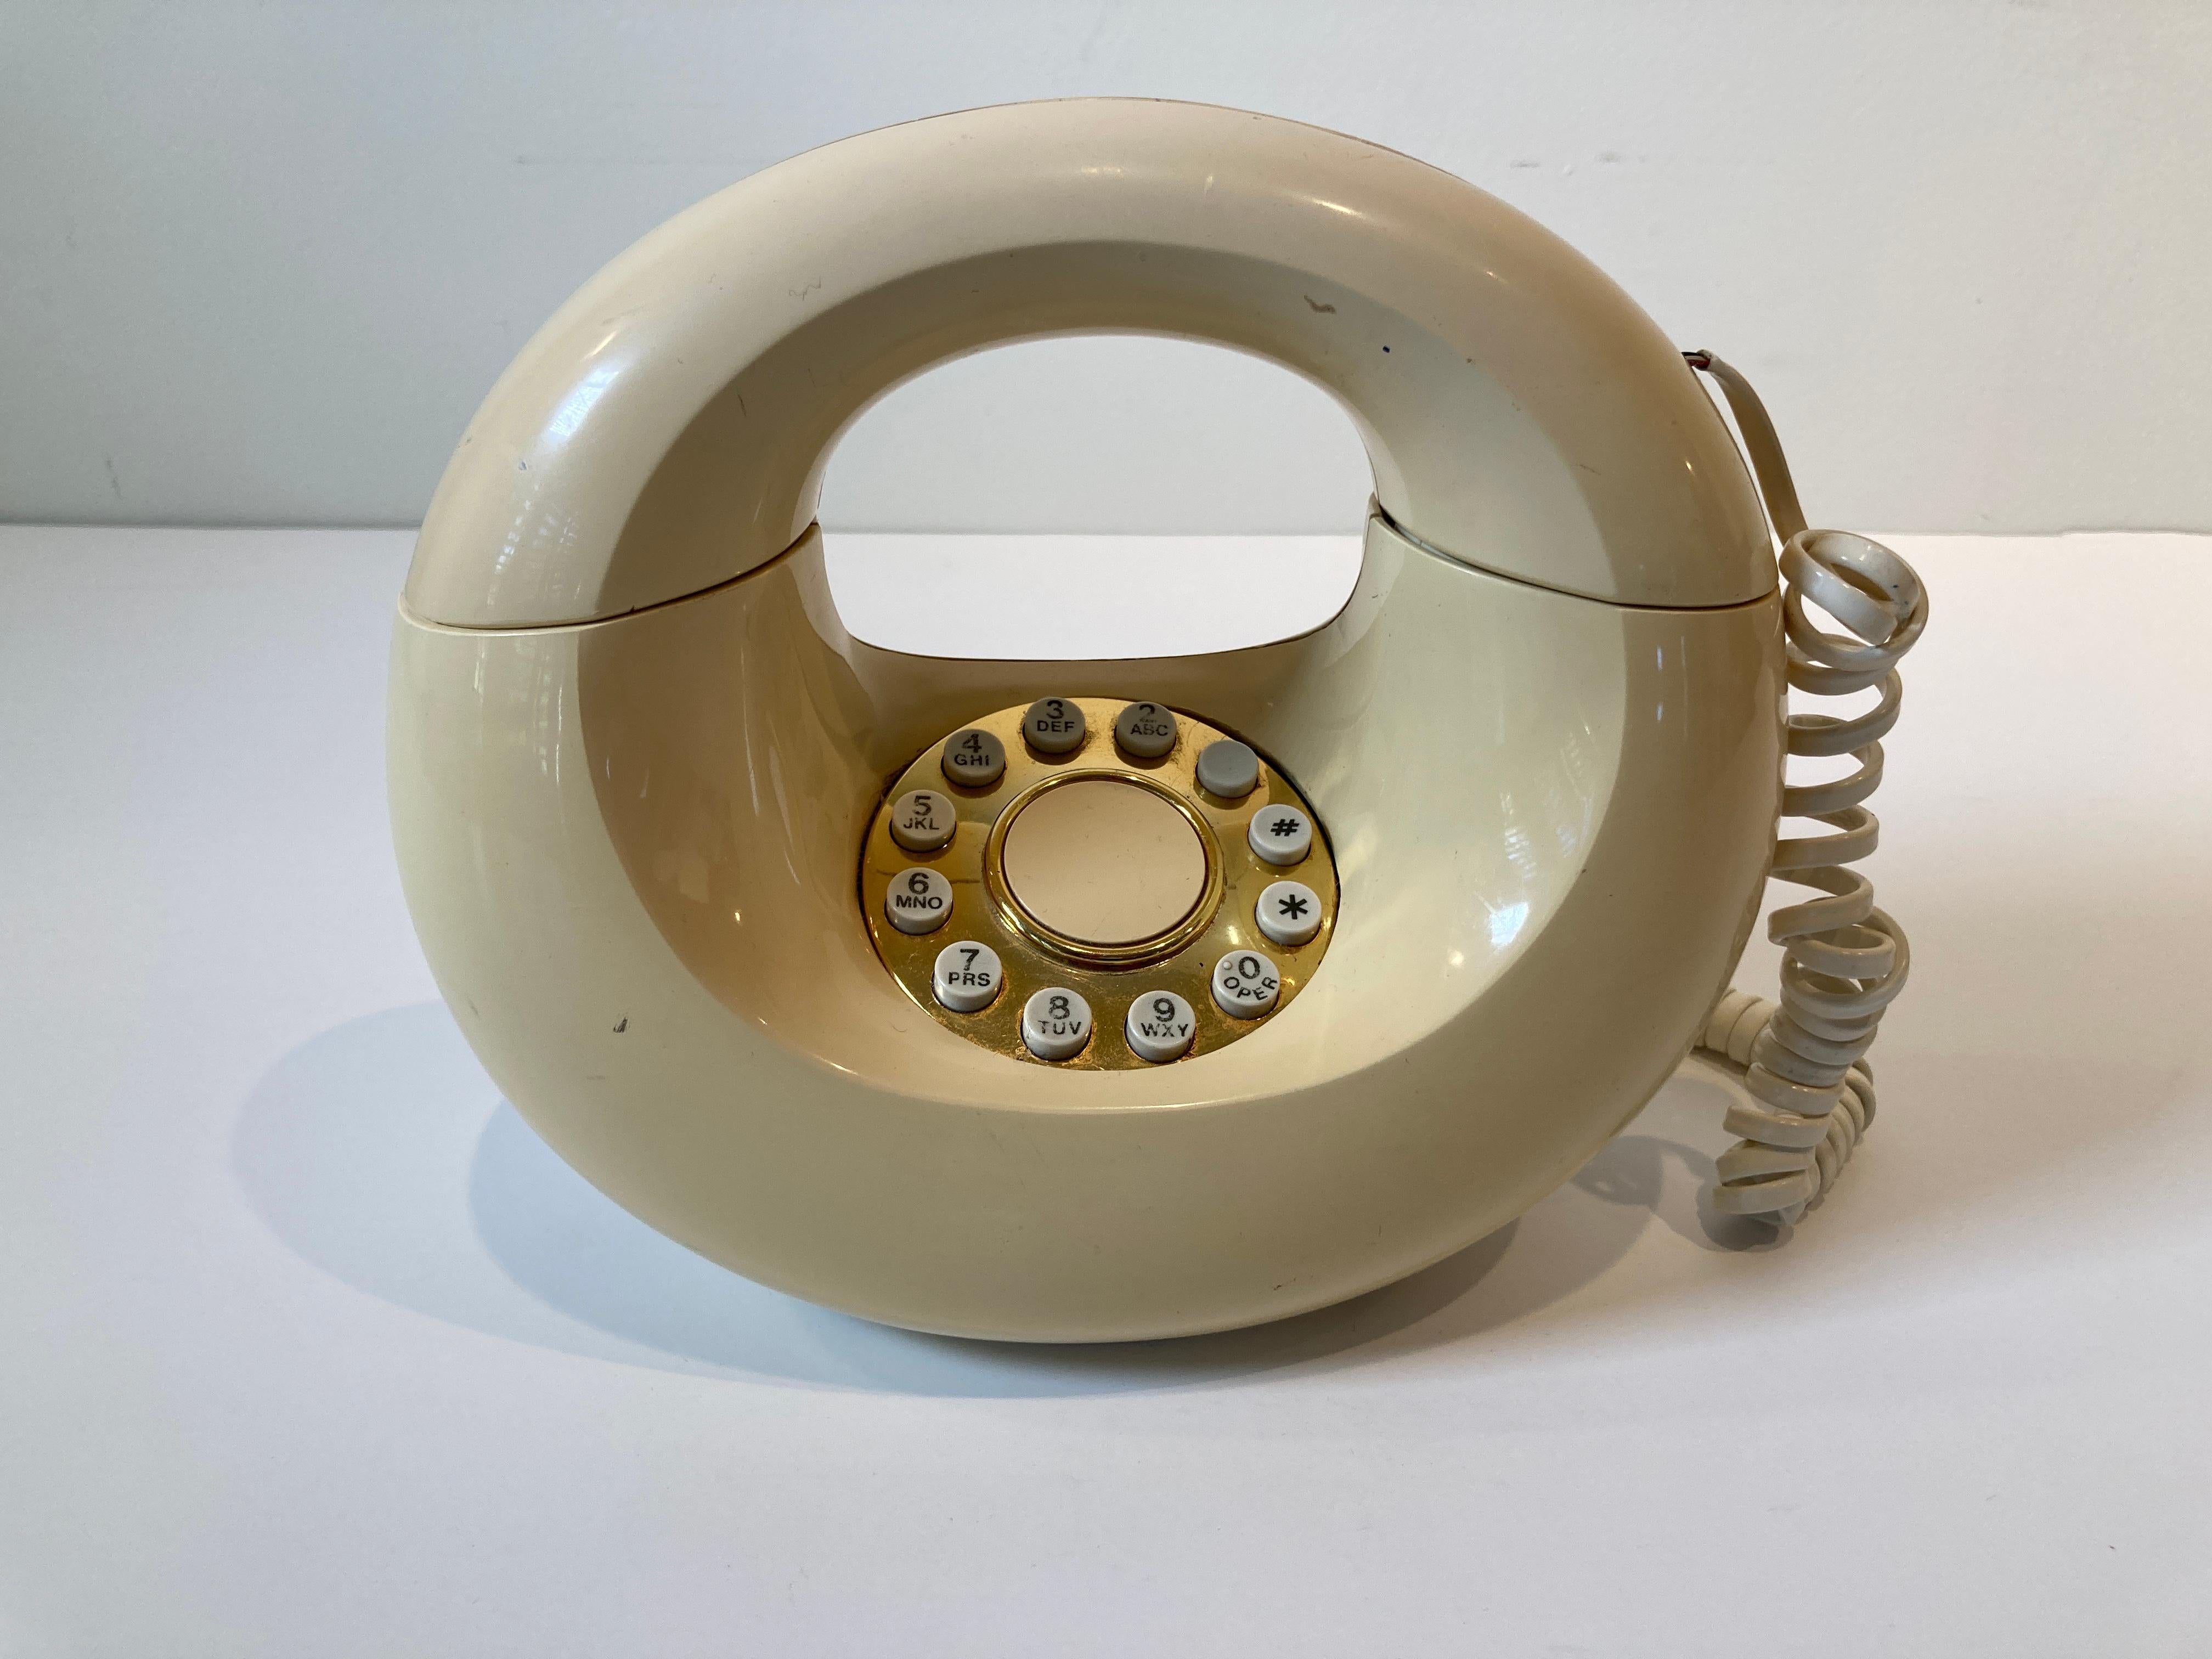 Vintage 1970s white vanilla color Western Electric sculptura Donut touch phone.
Western electric Sculptura Donut / Handbag phone in good condition.
Vintage Genie push button telephone in cream color, Donut shape RETRO Modern style telephone.
Due to